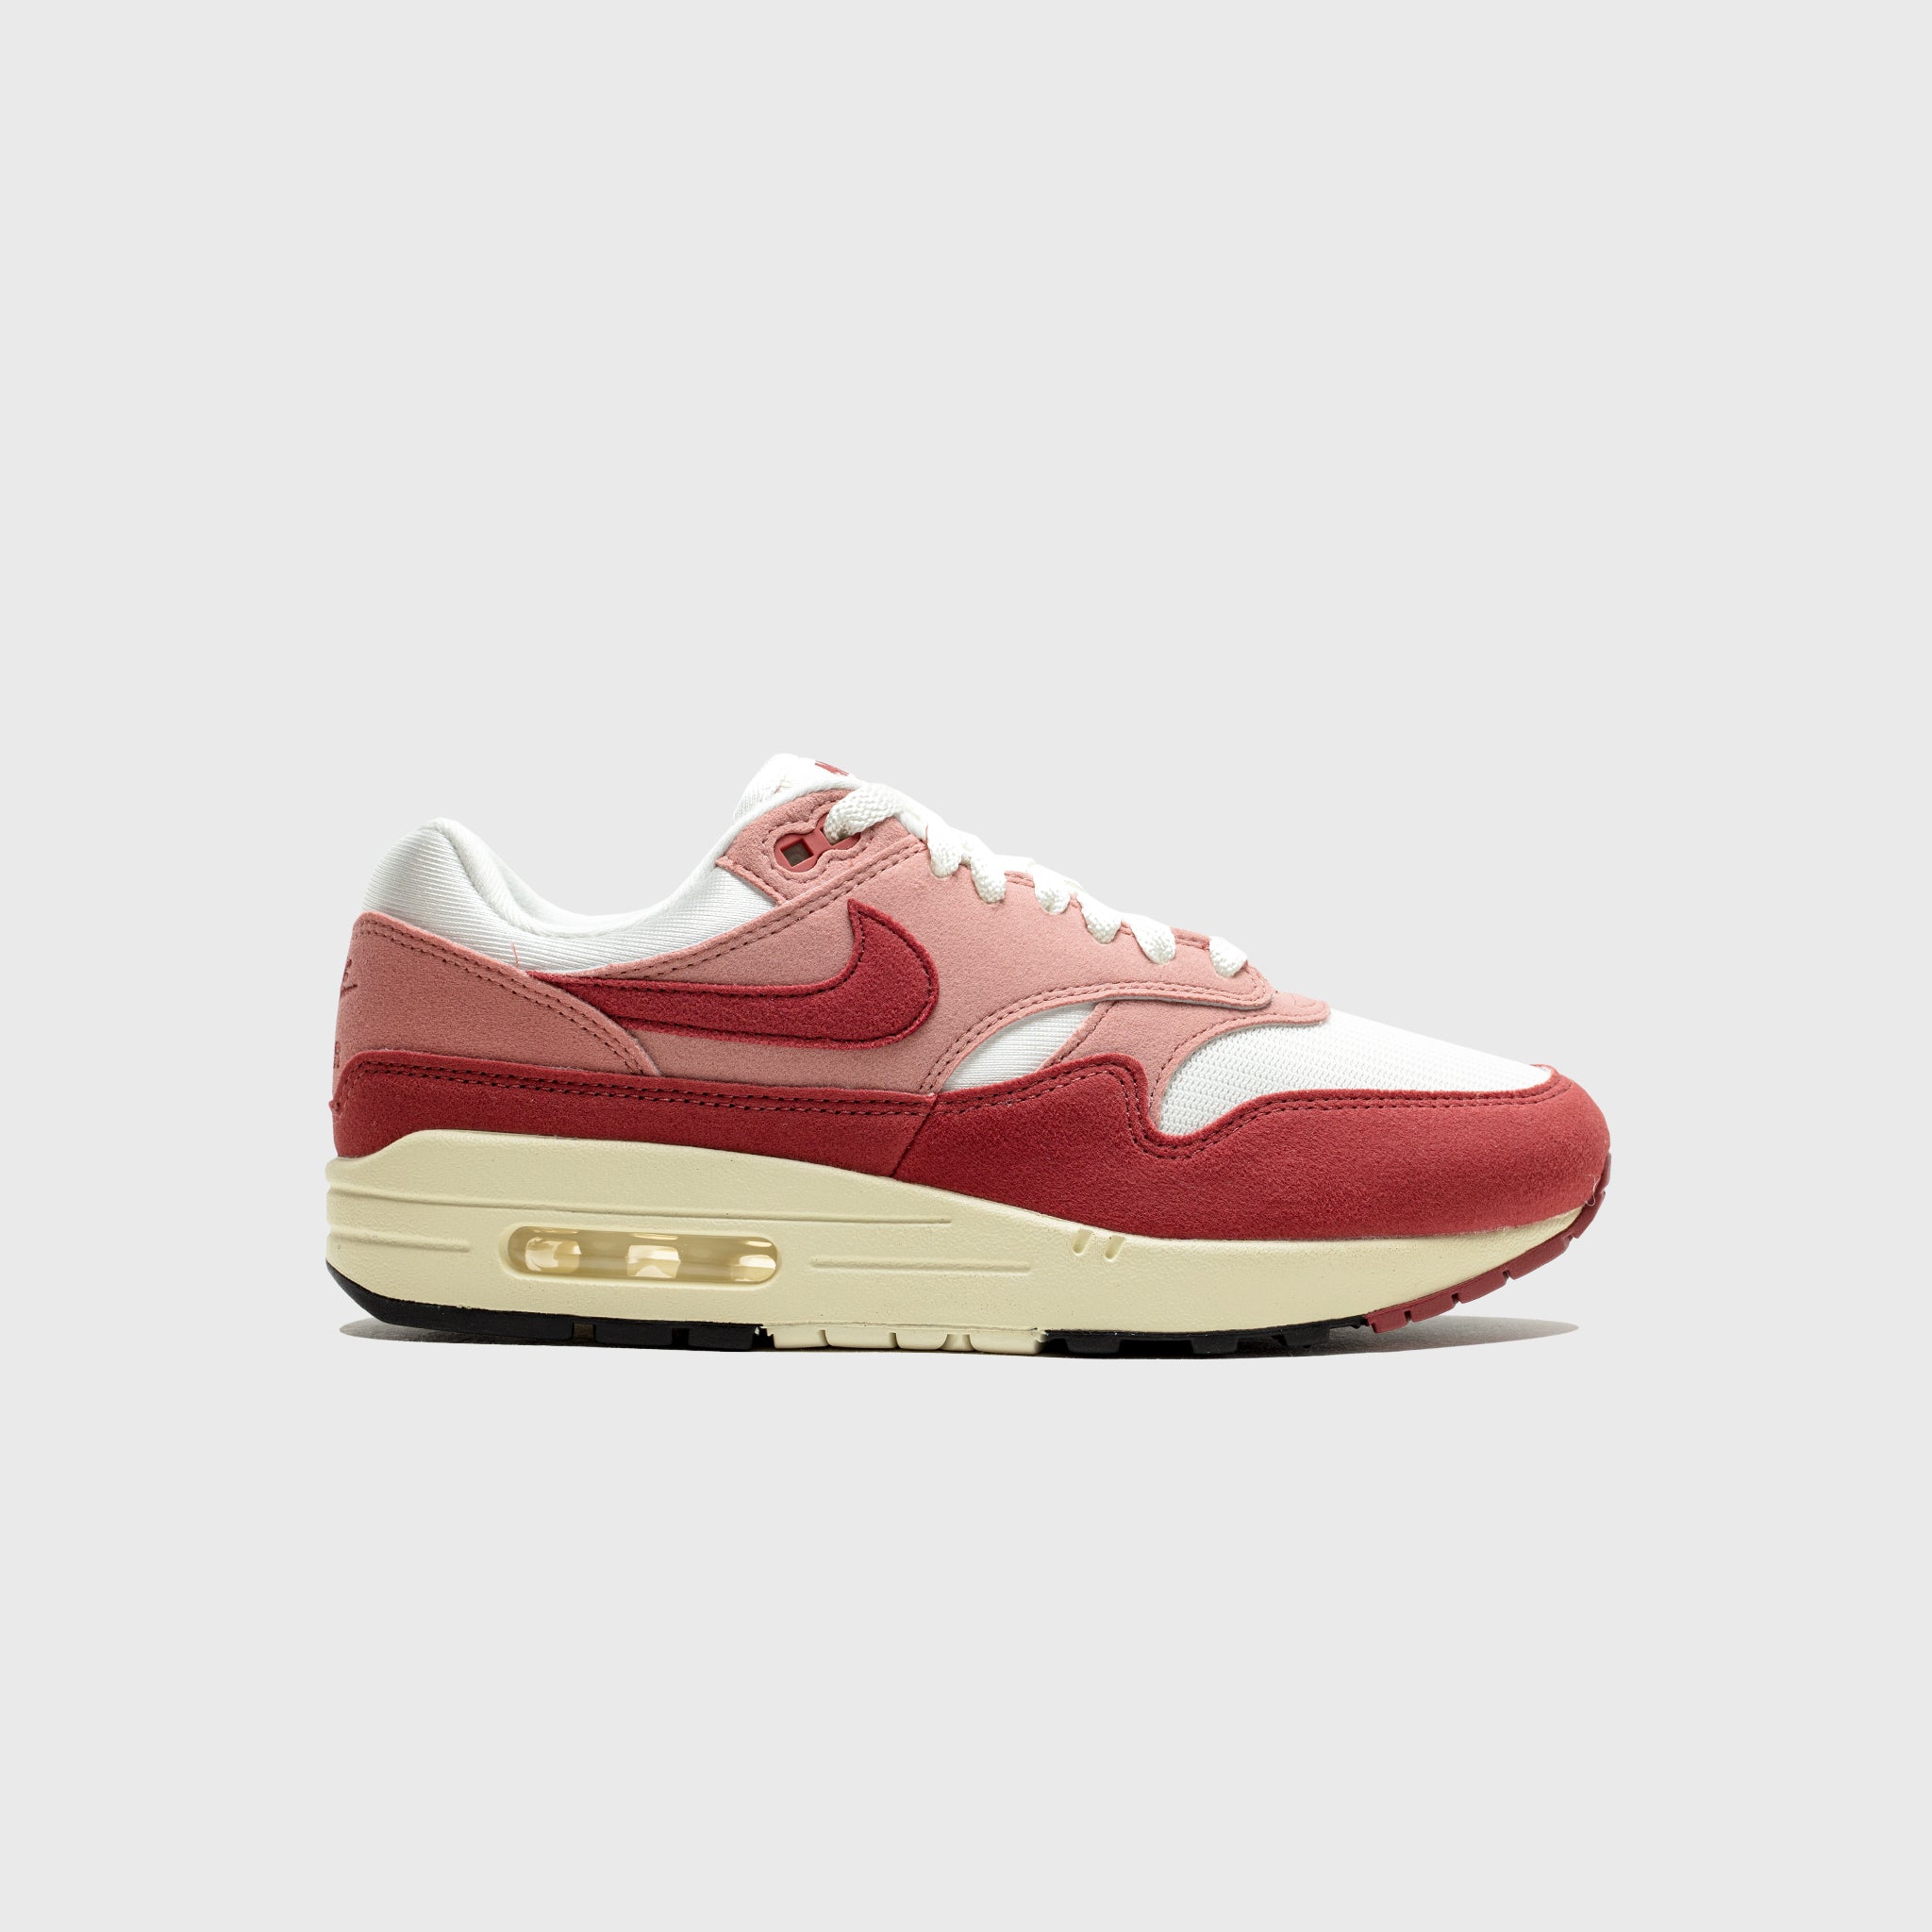 WMNS AIR MAX 1 "RED STARDUST"